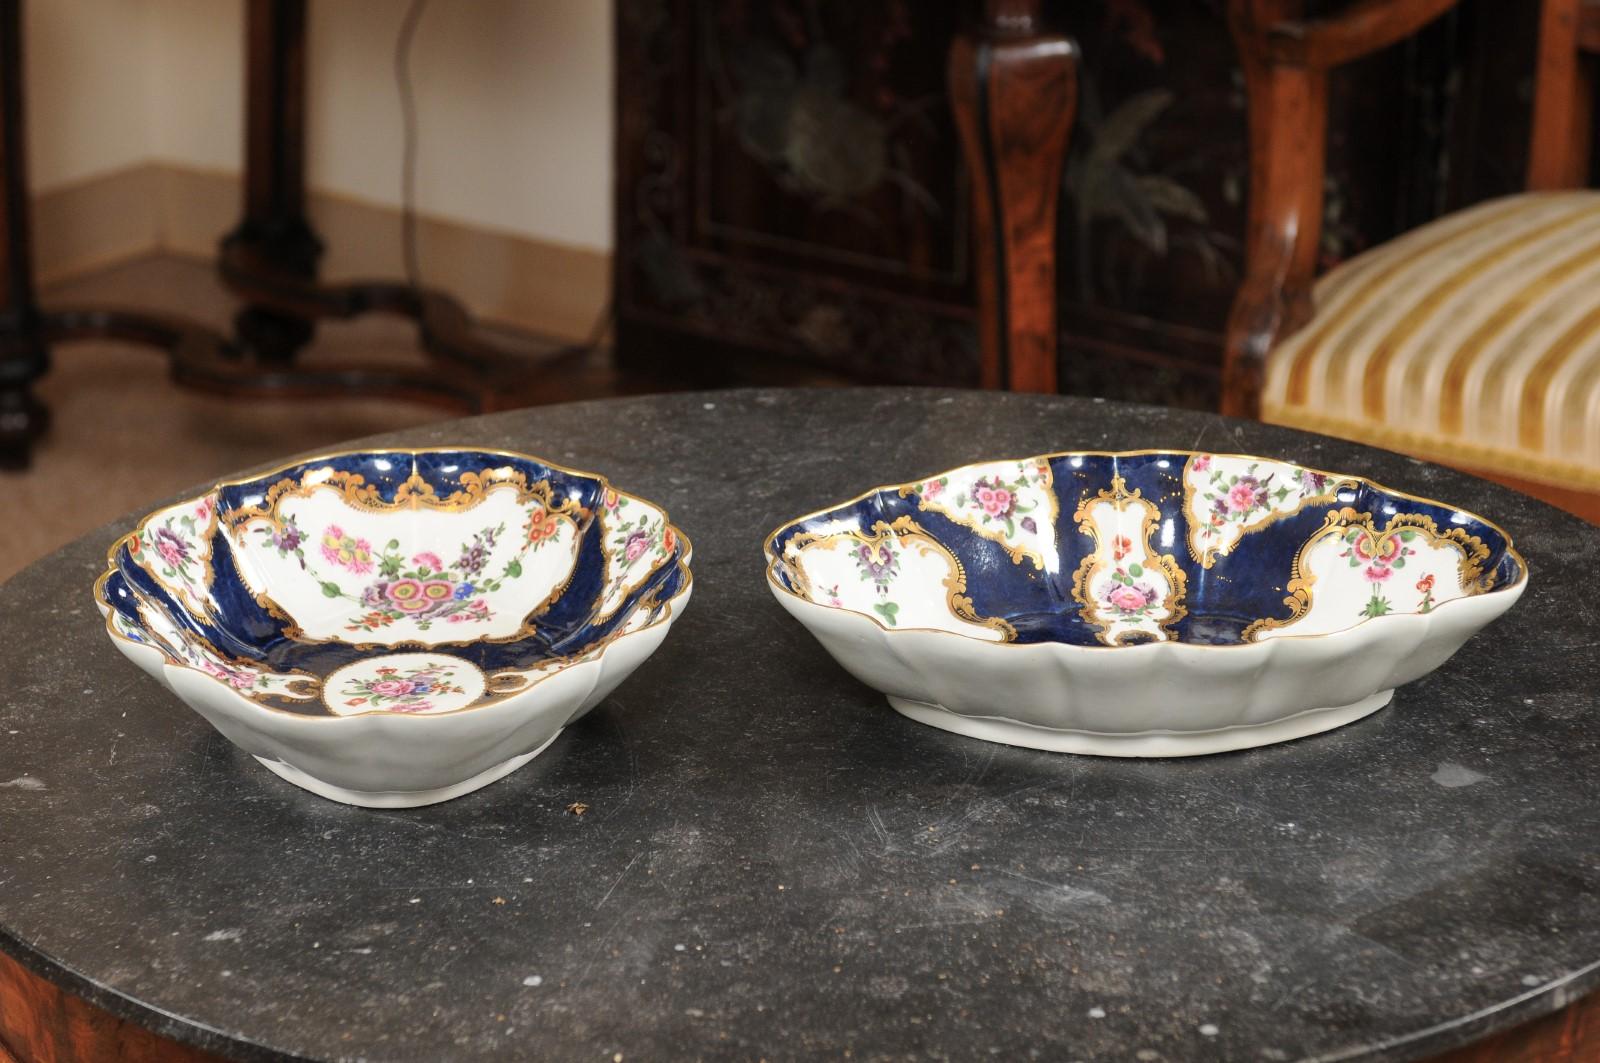 Pair of 18th Century English Worcester Porcelain Serving Dishes, “Dr. Wall” For Sale 6